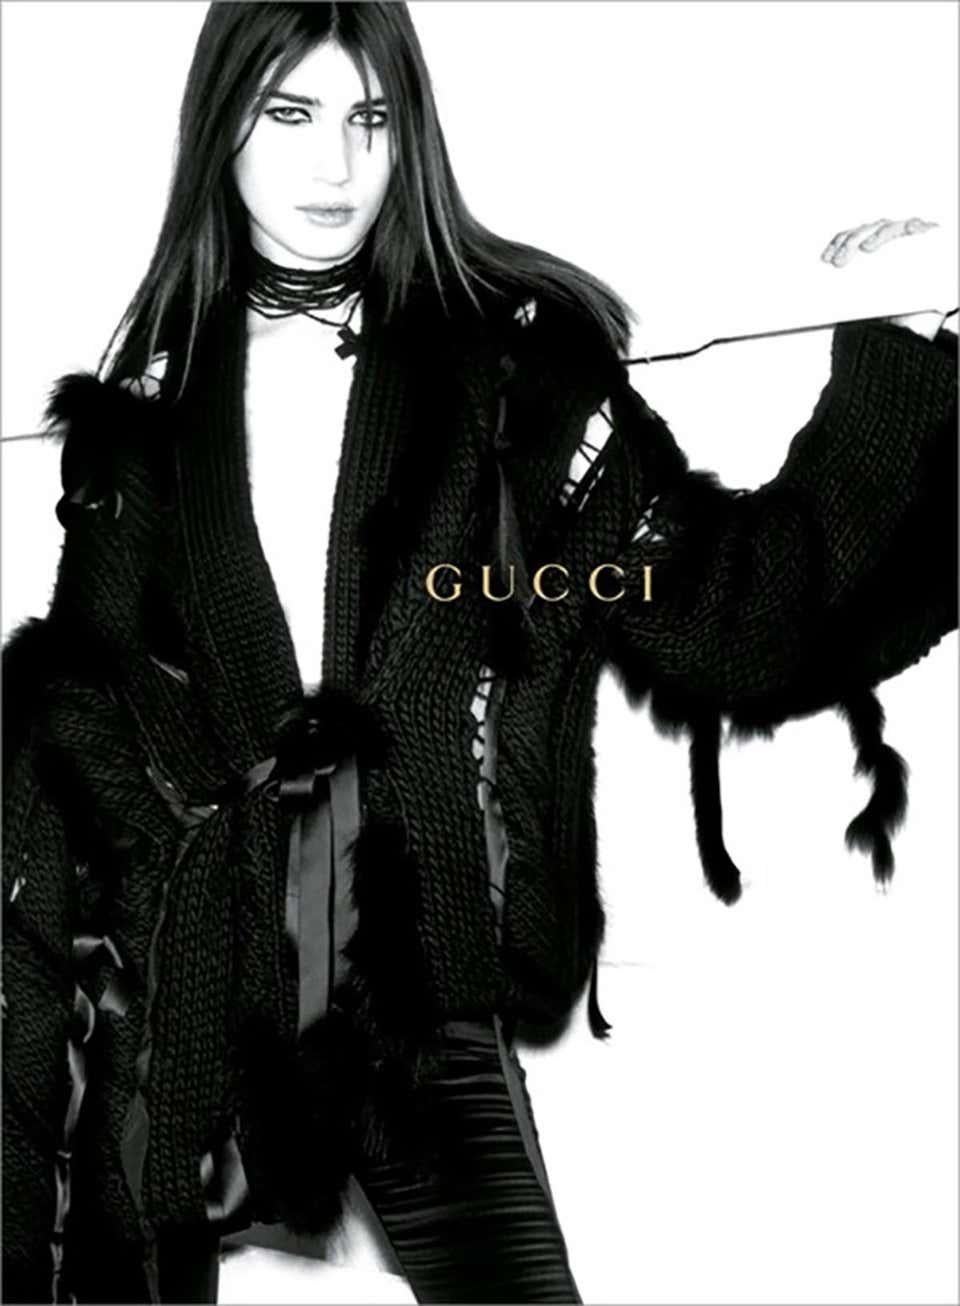 The Most Luxurious GUCCI Sweater Cardigan Ever!
Extremely Rare!
F/W 2002 Collection
Size M ( oversize - will fit bigger sizes also)
Color - Black, 80% Wool
Finished with Silk Ribbons and Genuine FOX Fur Trim Throughout
New without tag.
Heavyweight